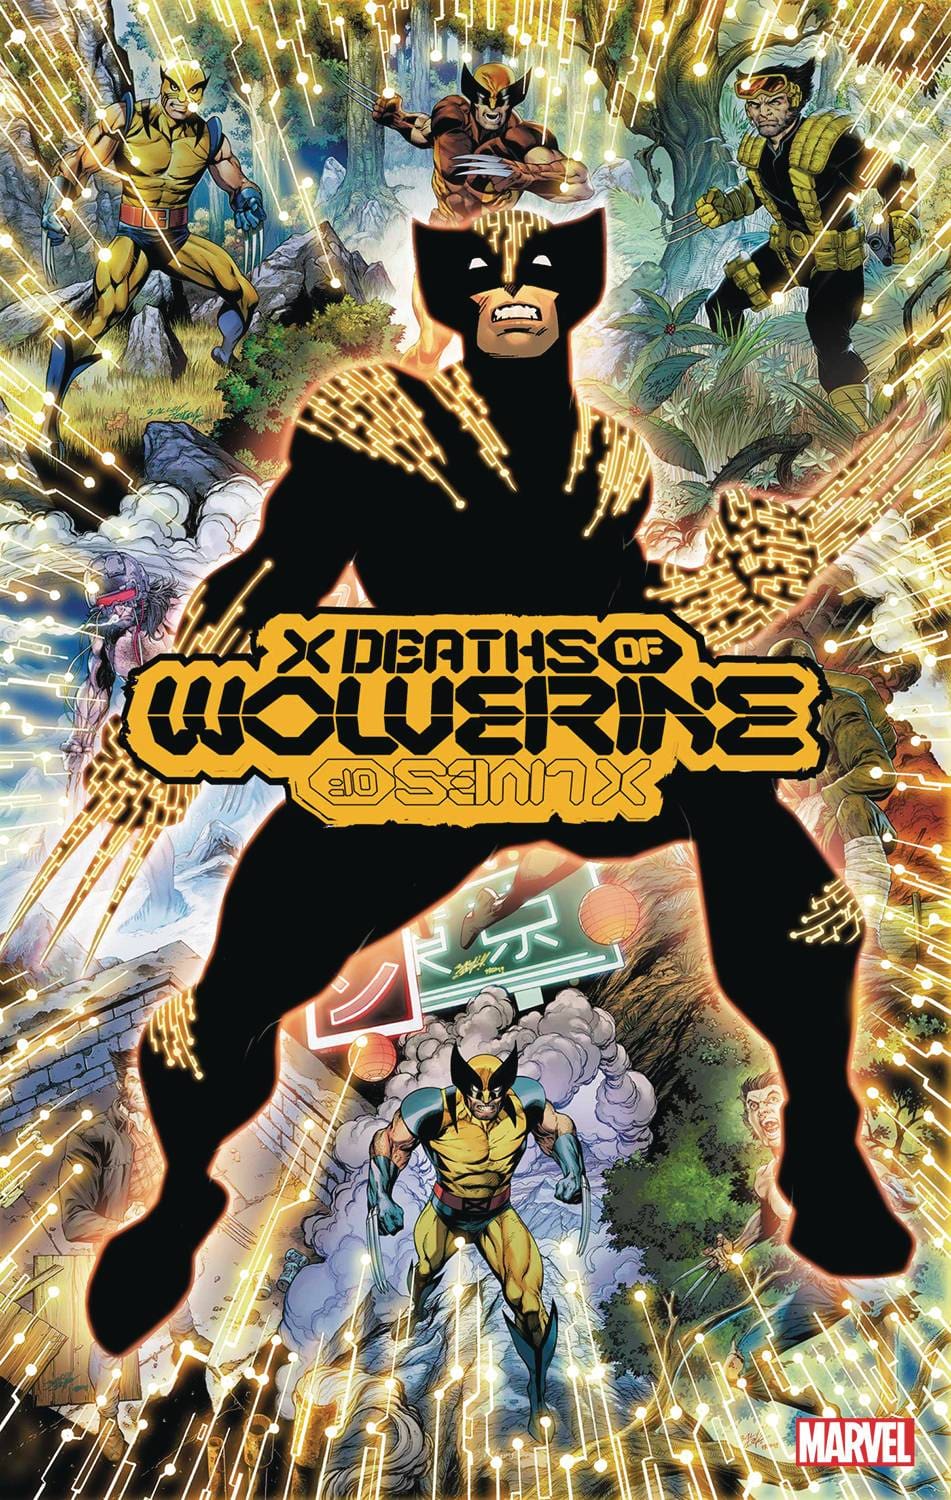 X DEATHS OF WOLVERINE #5 (OF 5) BAGLEY TRADING CARD VARIANT